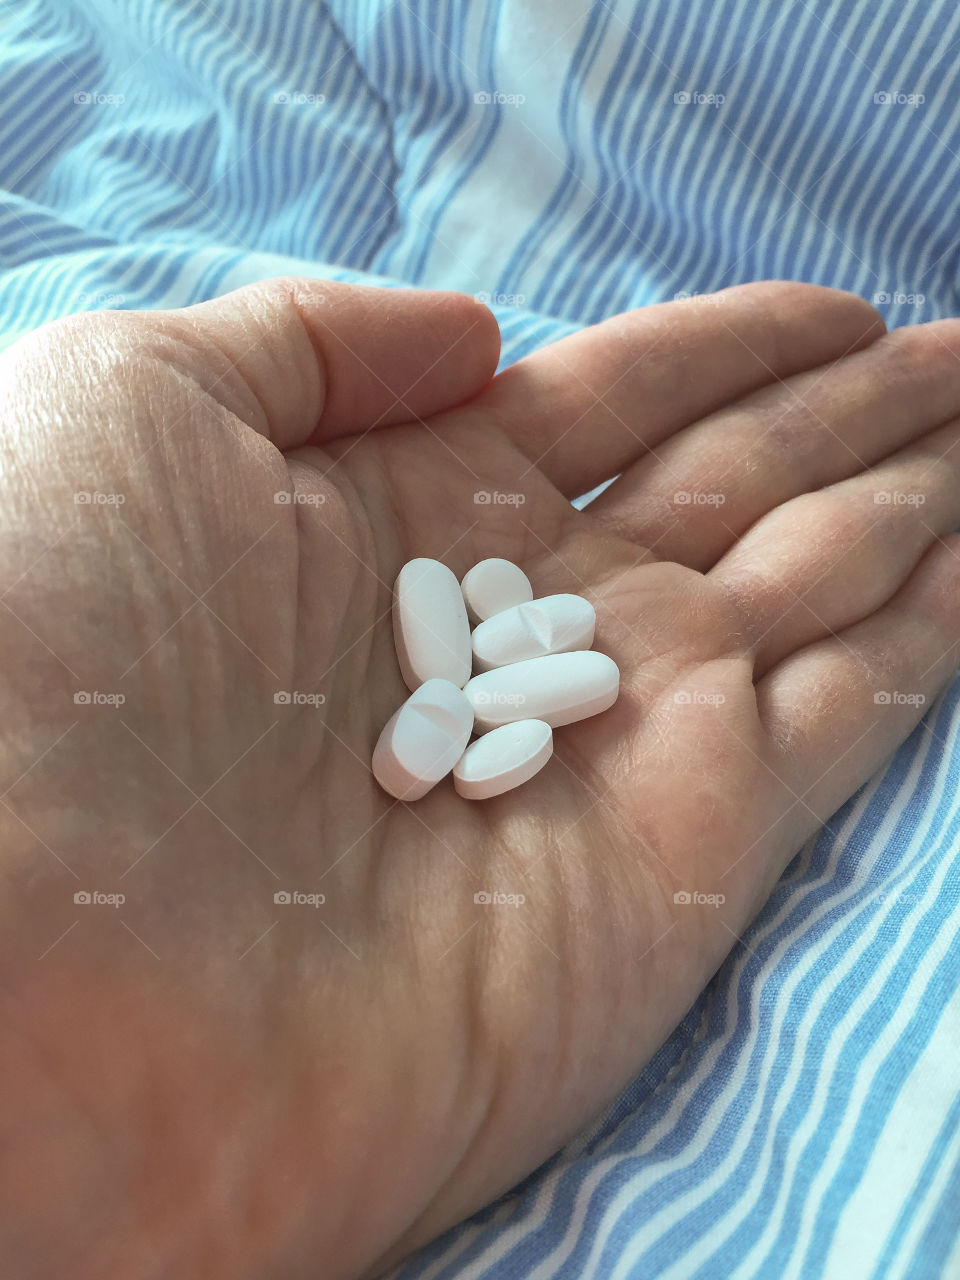 Womens hand holding six white pills in front of a hospital bed with a striped quilt.